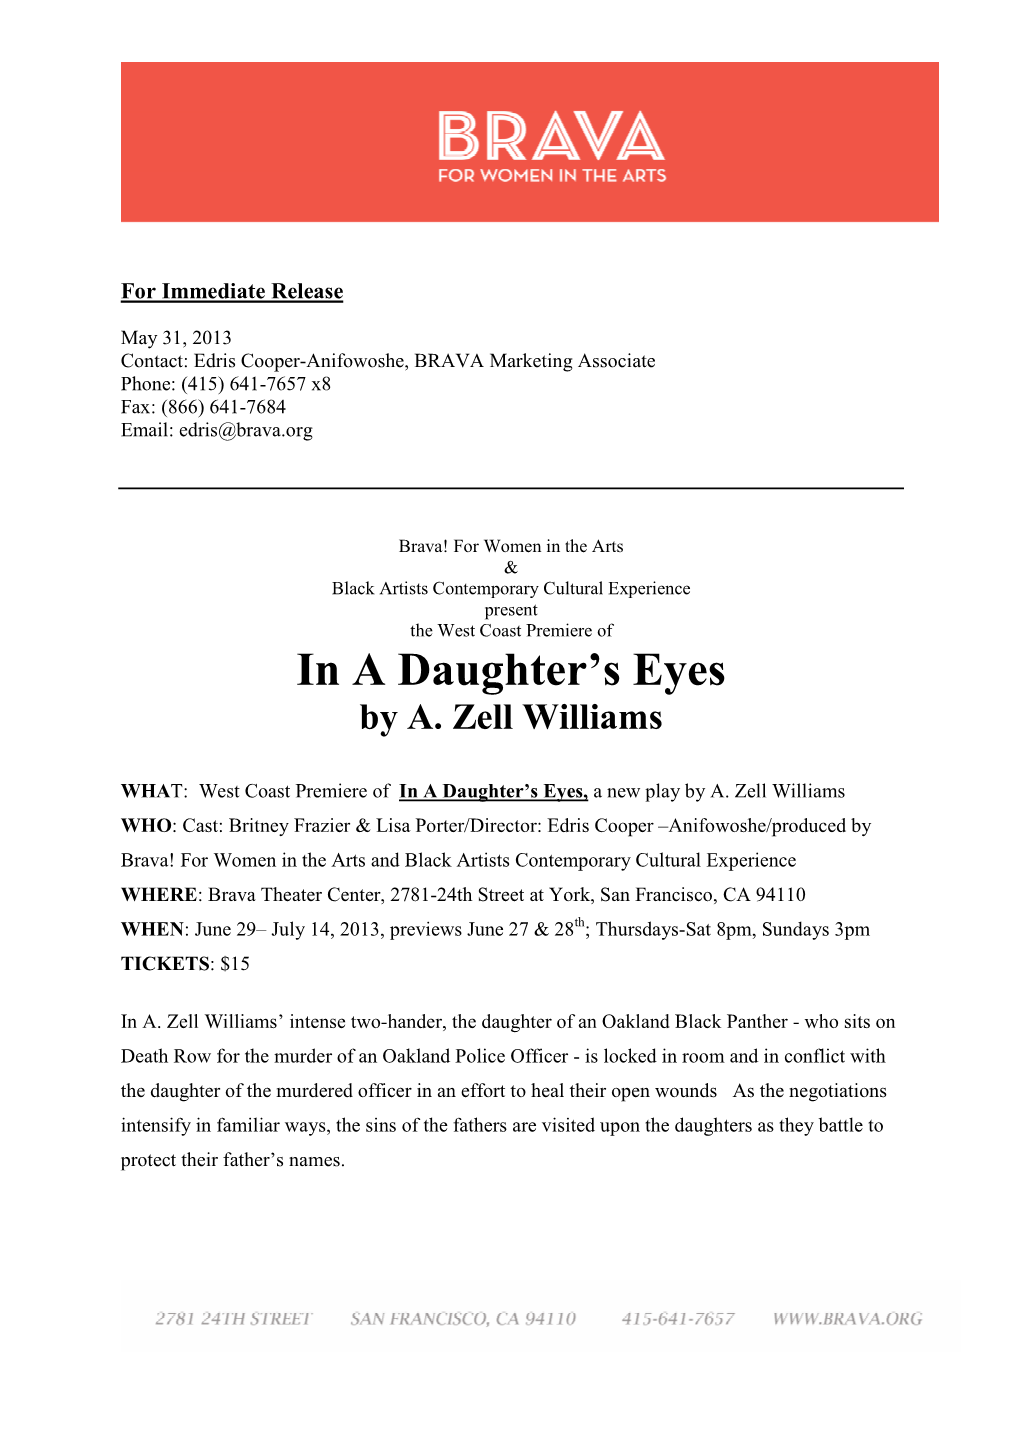 In a Daughter's Eyes